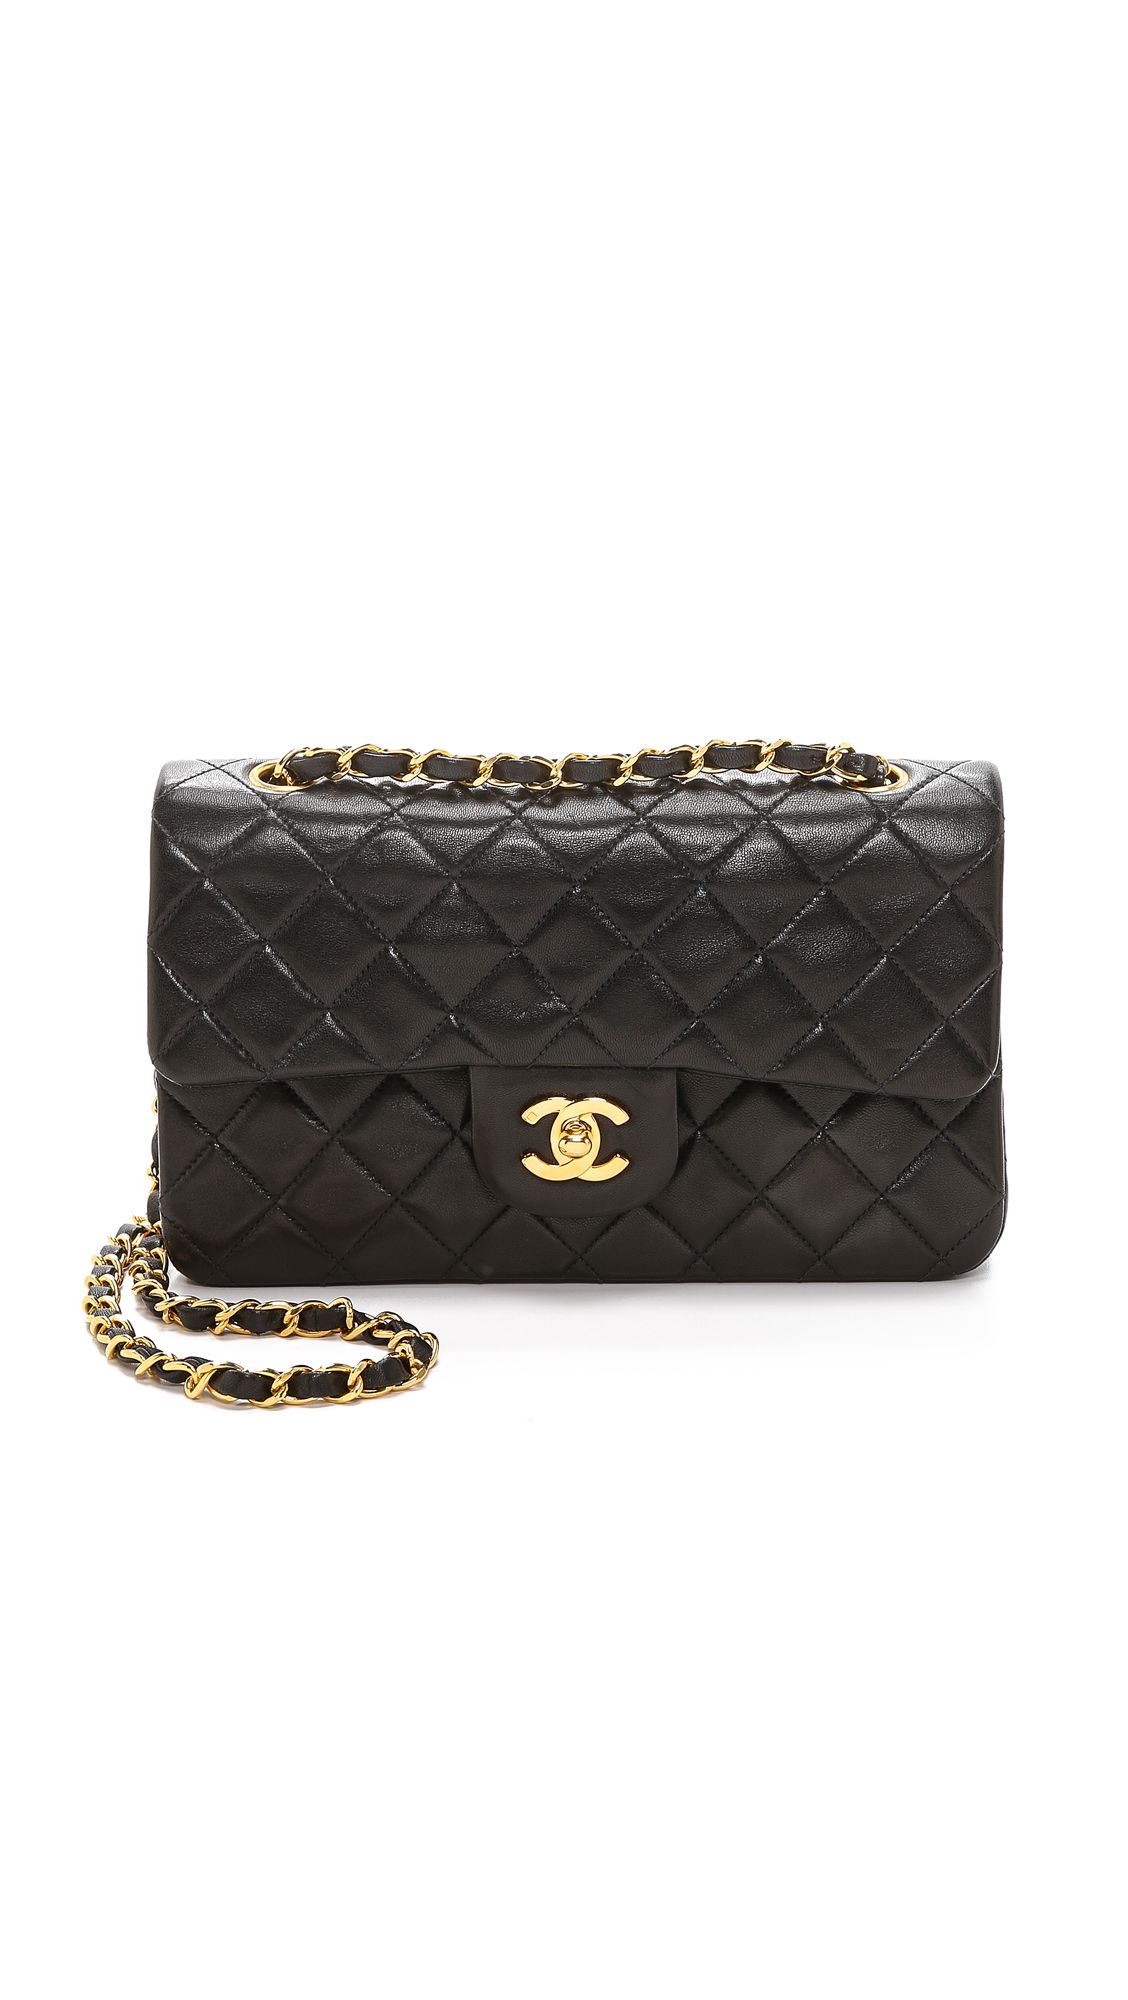 Chanel 2.55 Classic Flap Bag (Previously Owned) | Shopbop